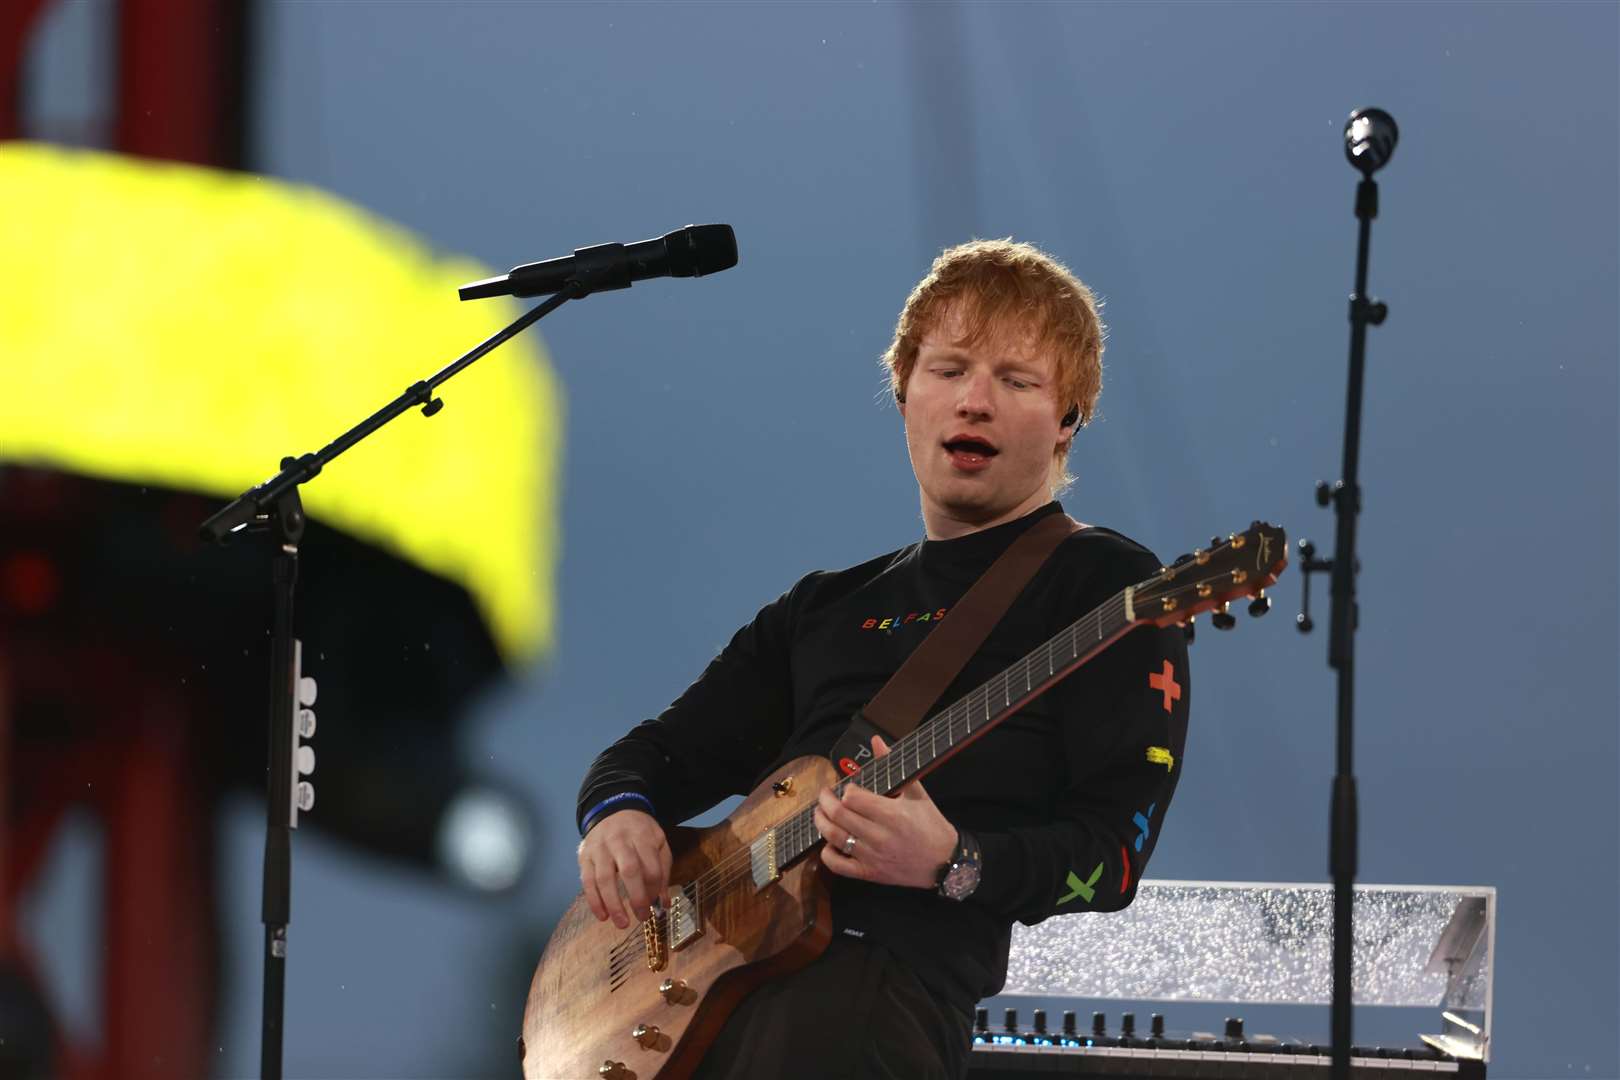 Ed Sheeran fans are expected to flock to Cardiff (PA)